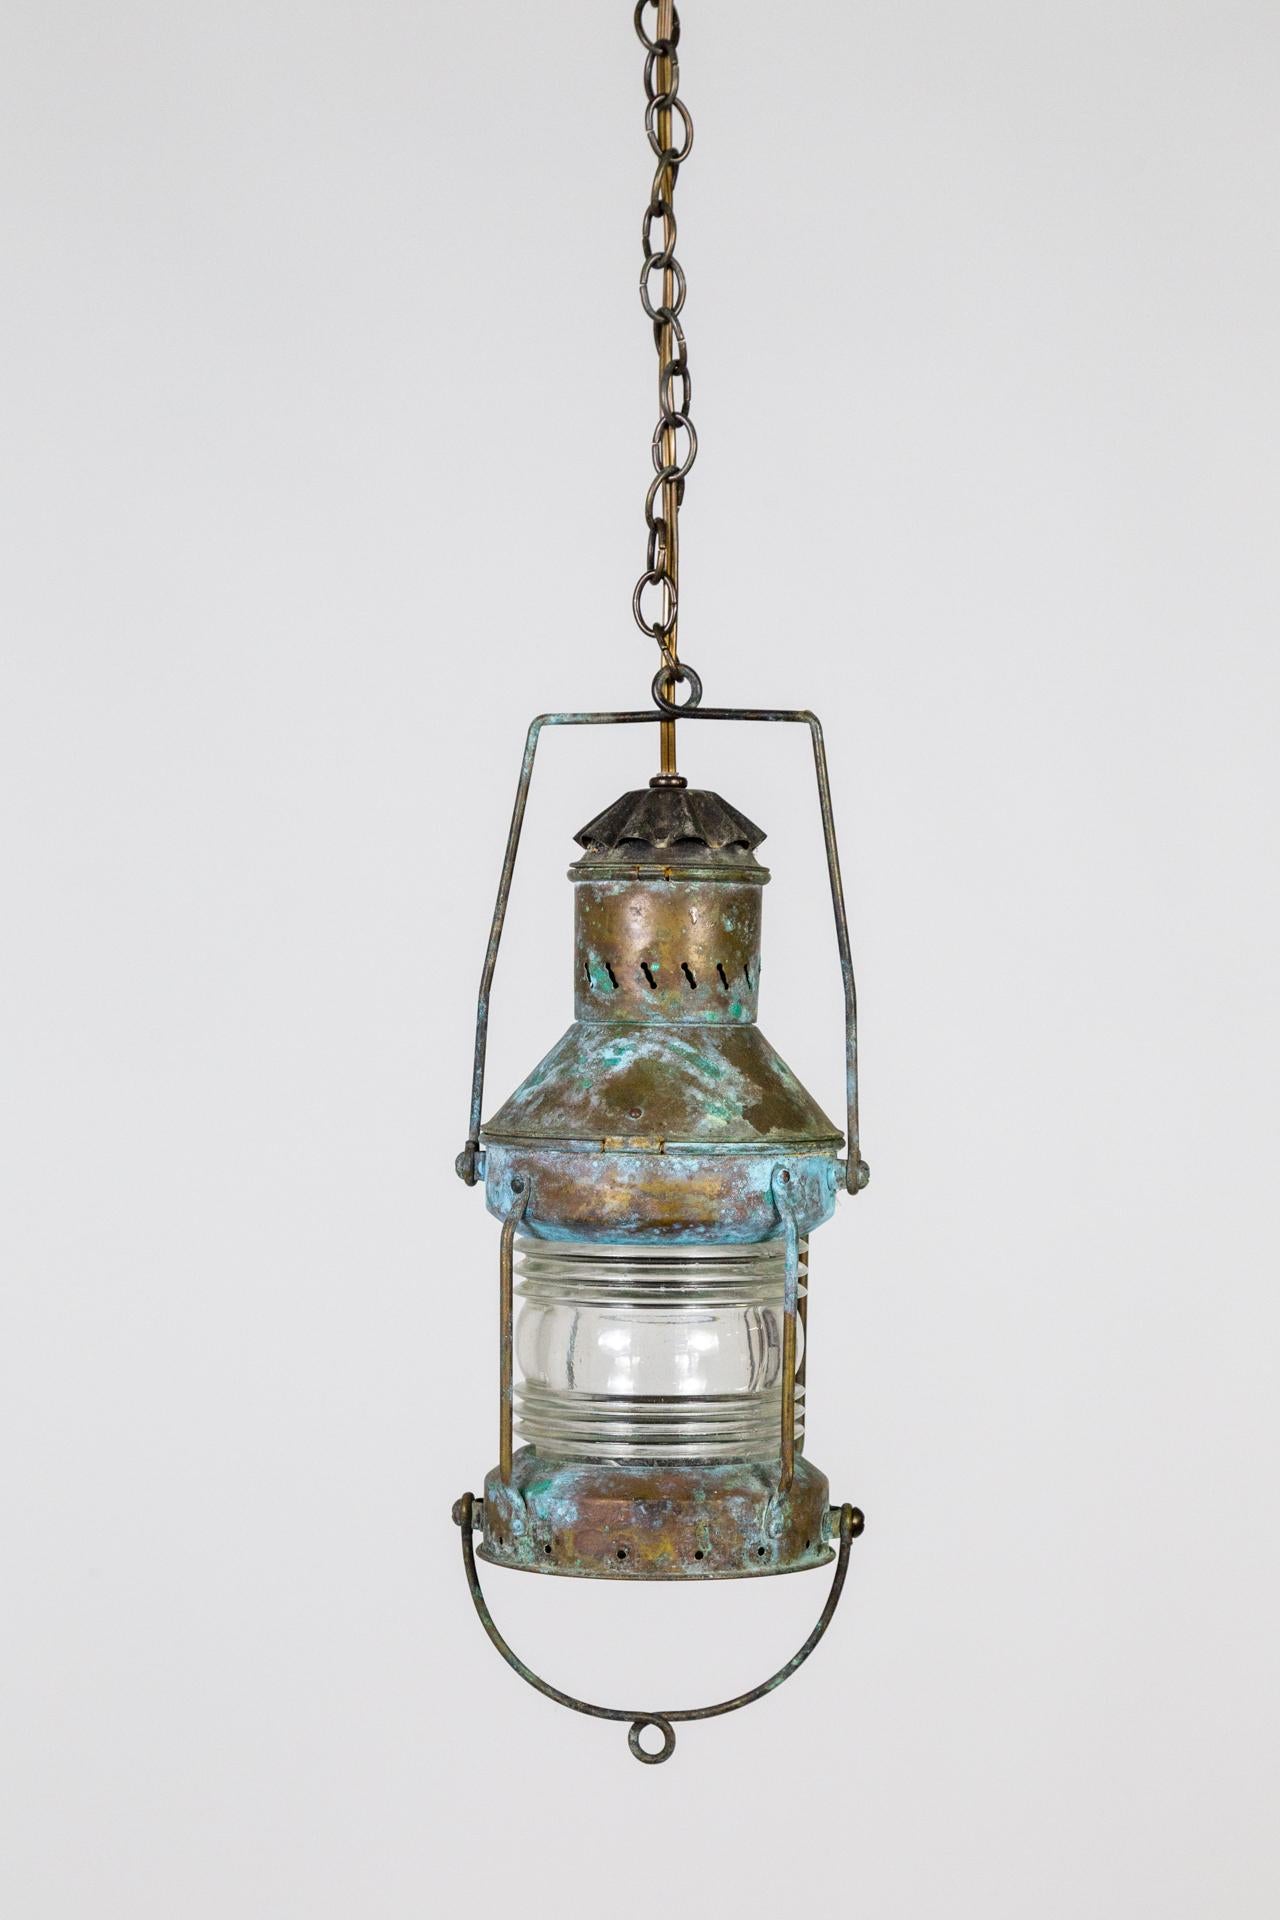 An early 20th-century hanging lantern in cylindrical form with beautiful diffusion from the Fresnel glass. With a remarkable antique brass, blue,  and verdigris patina and a long chain. Newly wired and made into a hanging light. 6